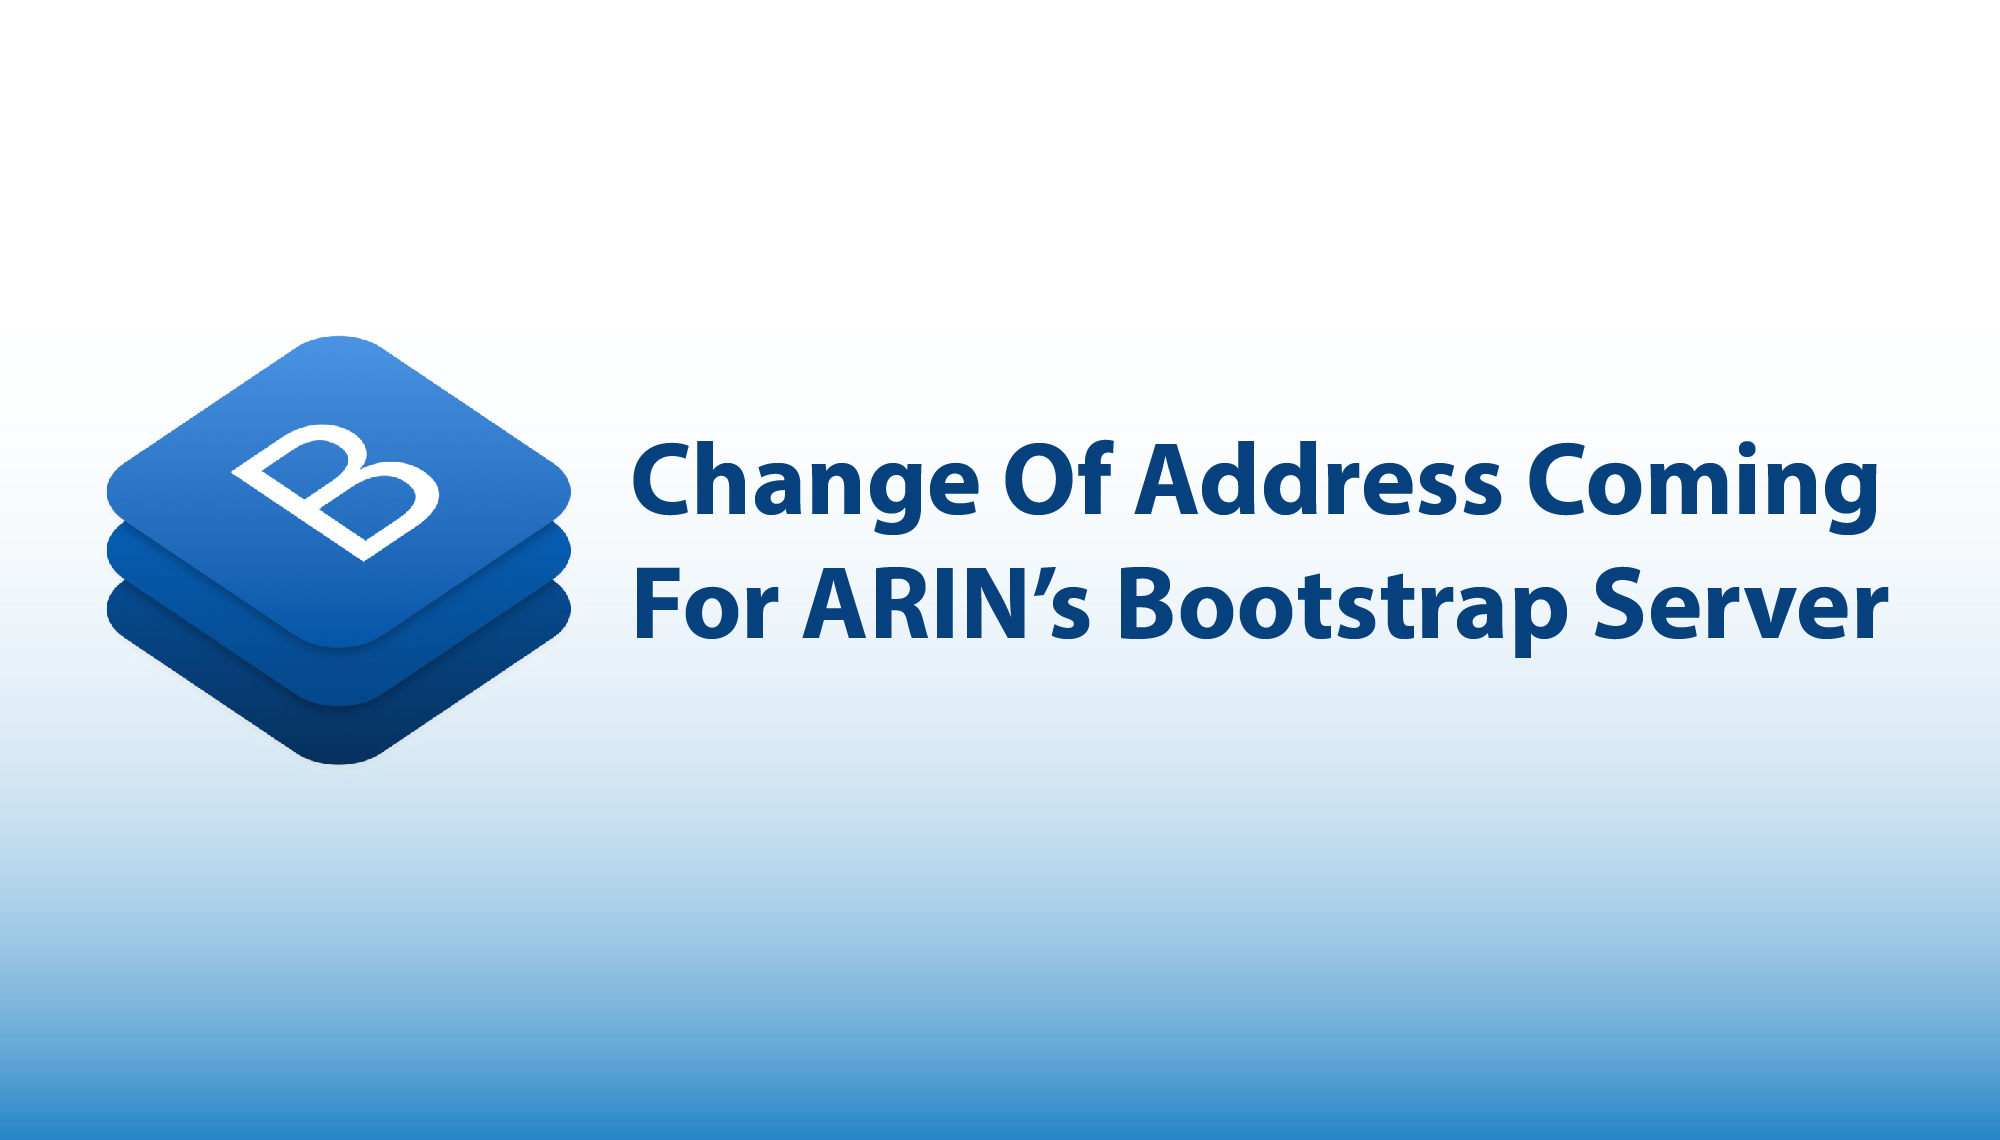 Buckle up: Change of address coming for ARIN’s Bootstrap Server